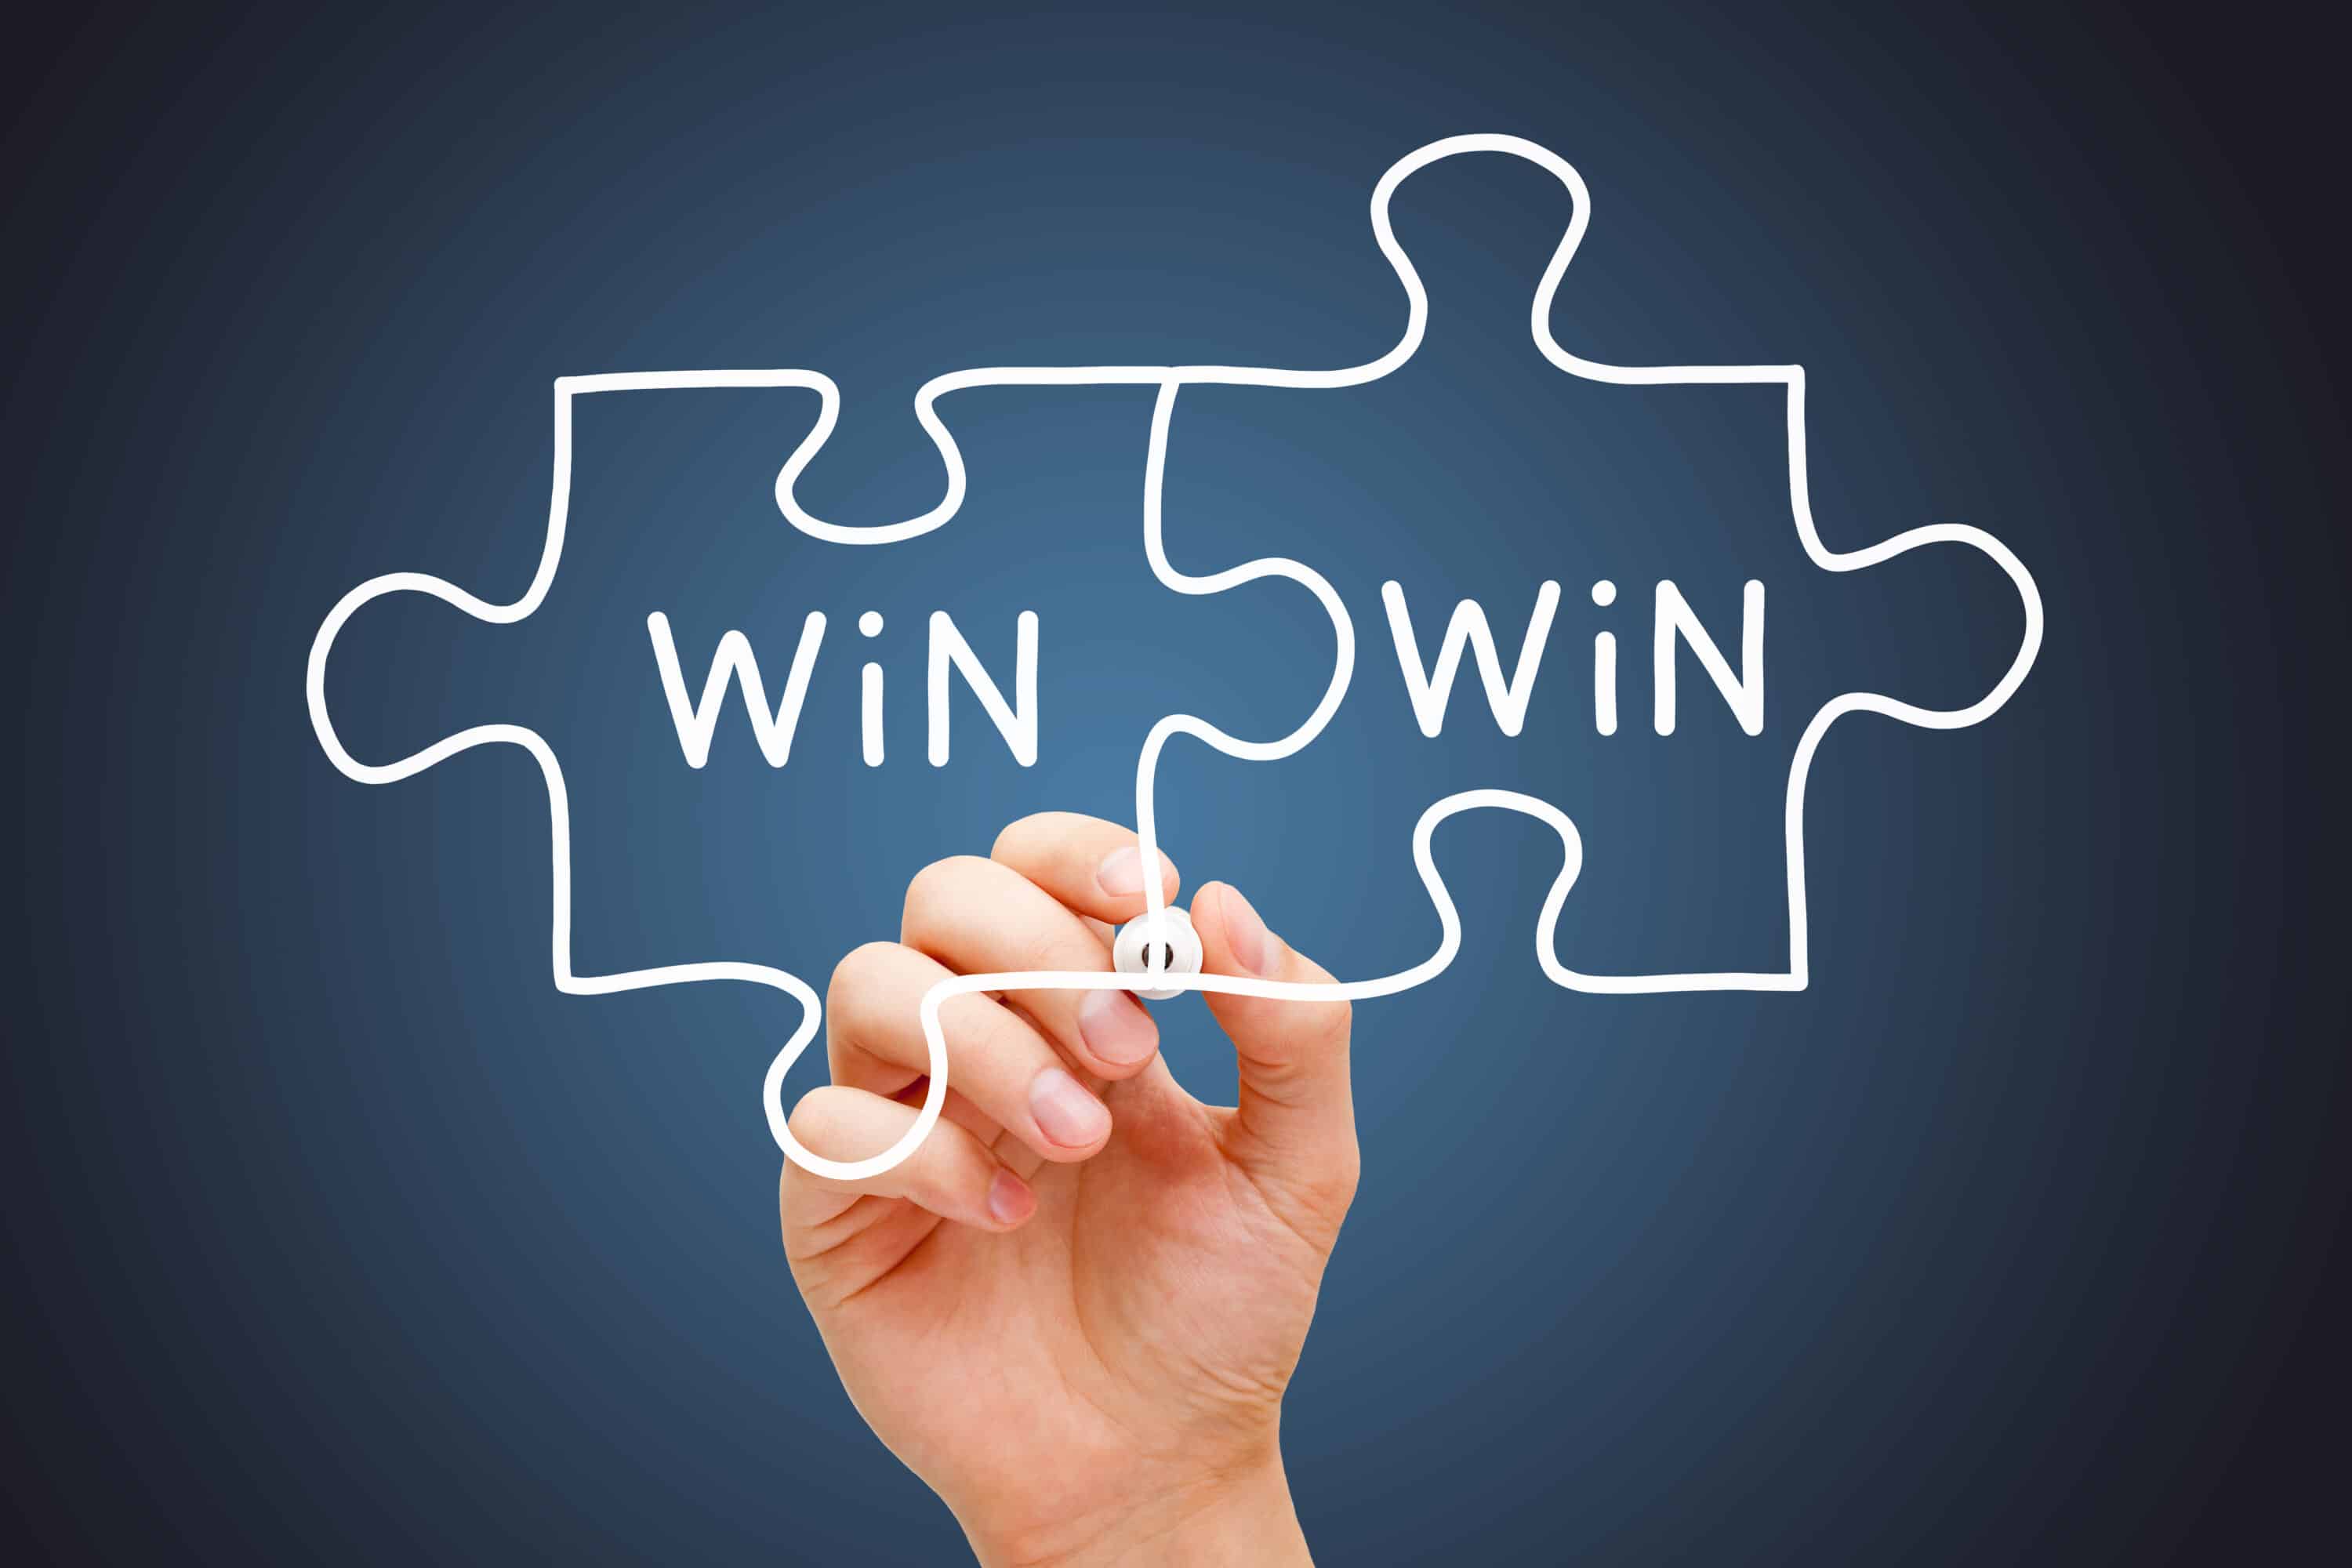 Stop Losing Where You Should be Winning blog and win puzzle pieces.